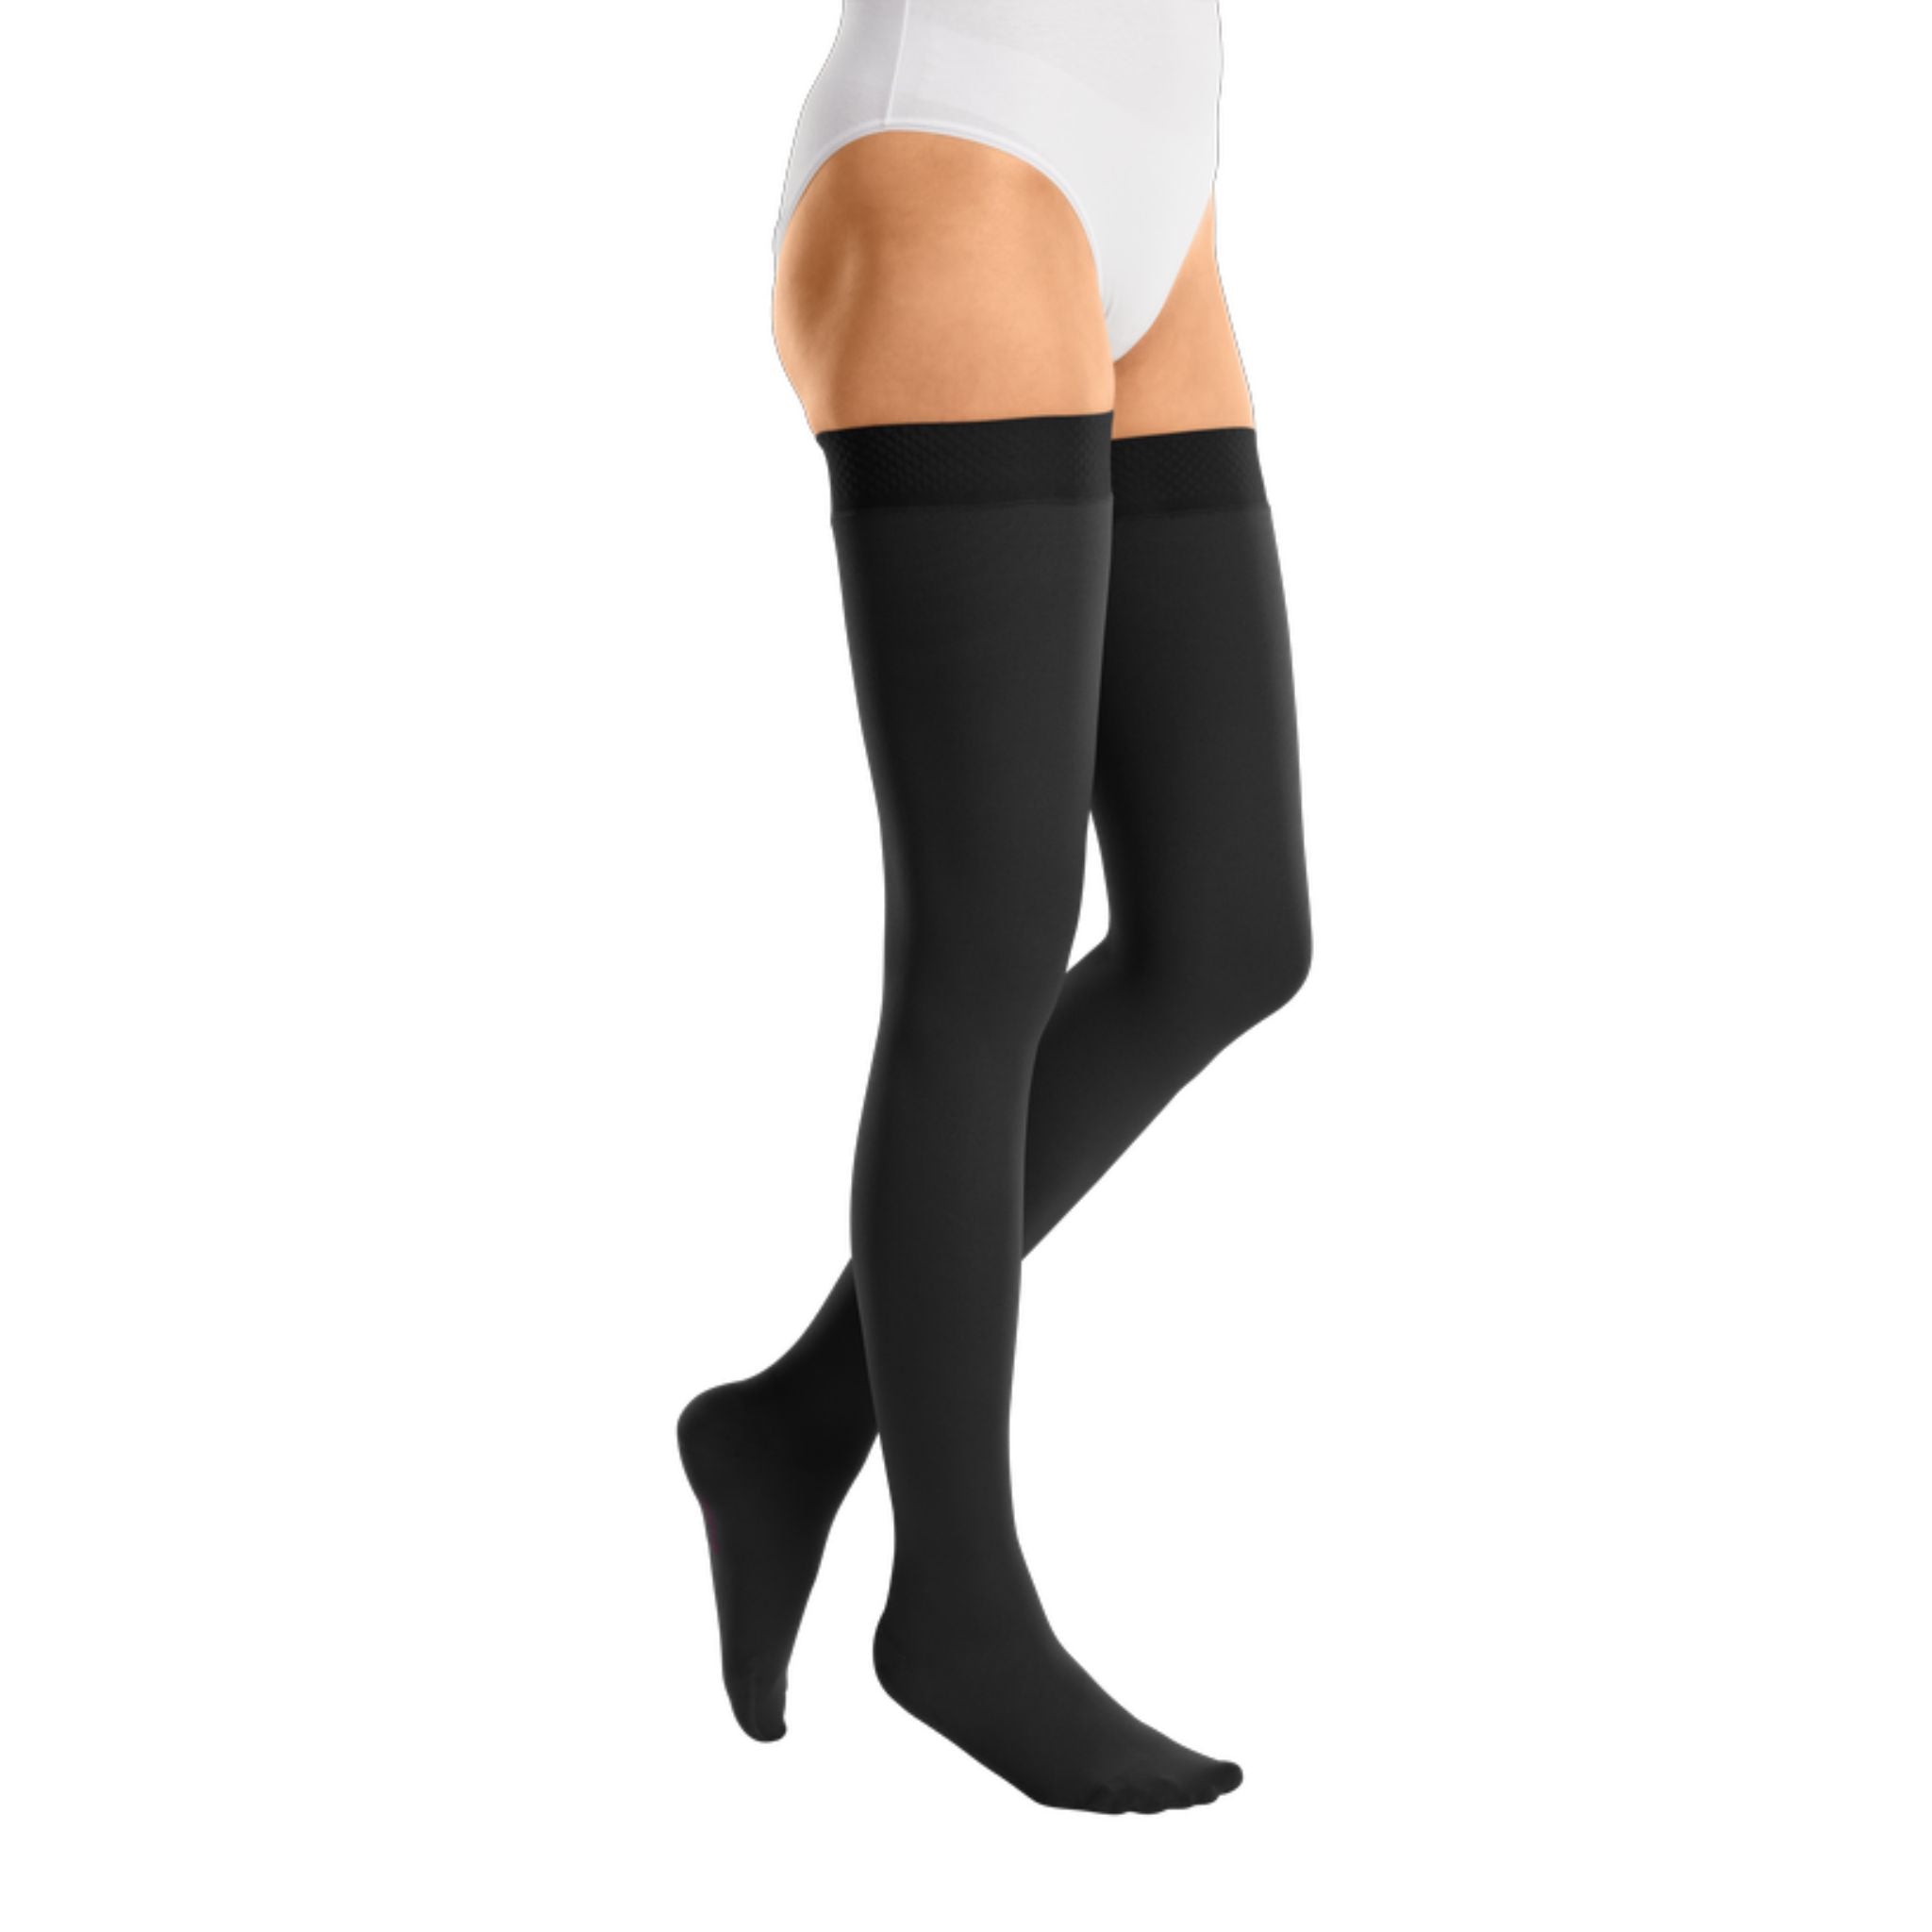 Compression Stockings | Thigh High | Silicone Topband Wide | Open Toe | Black | mediven cotton